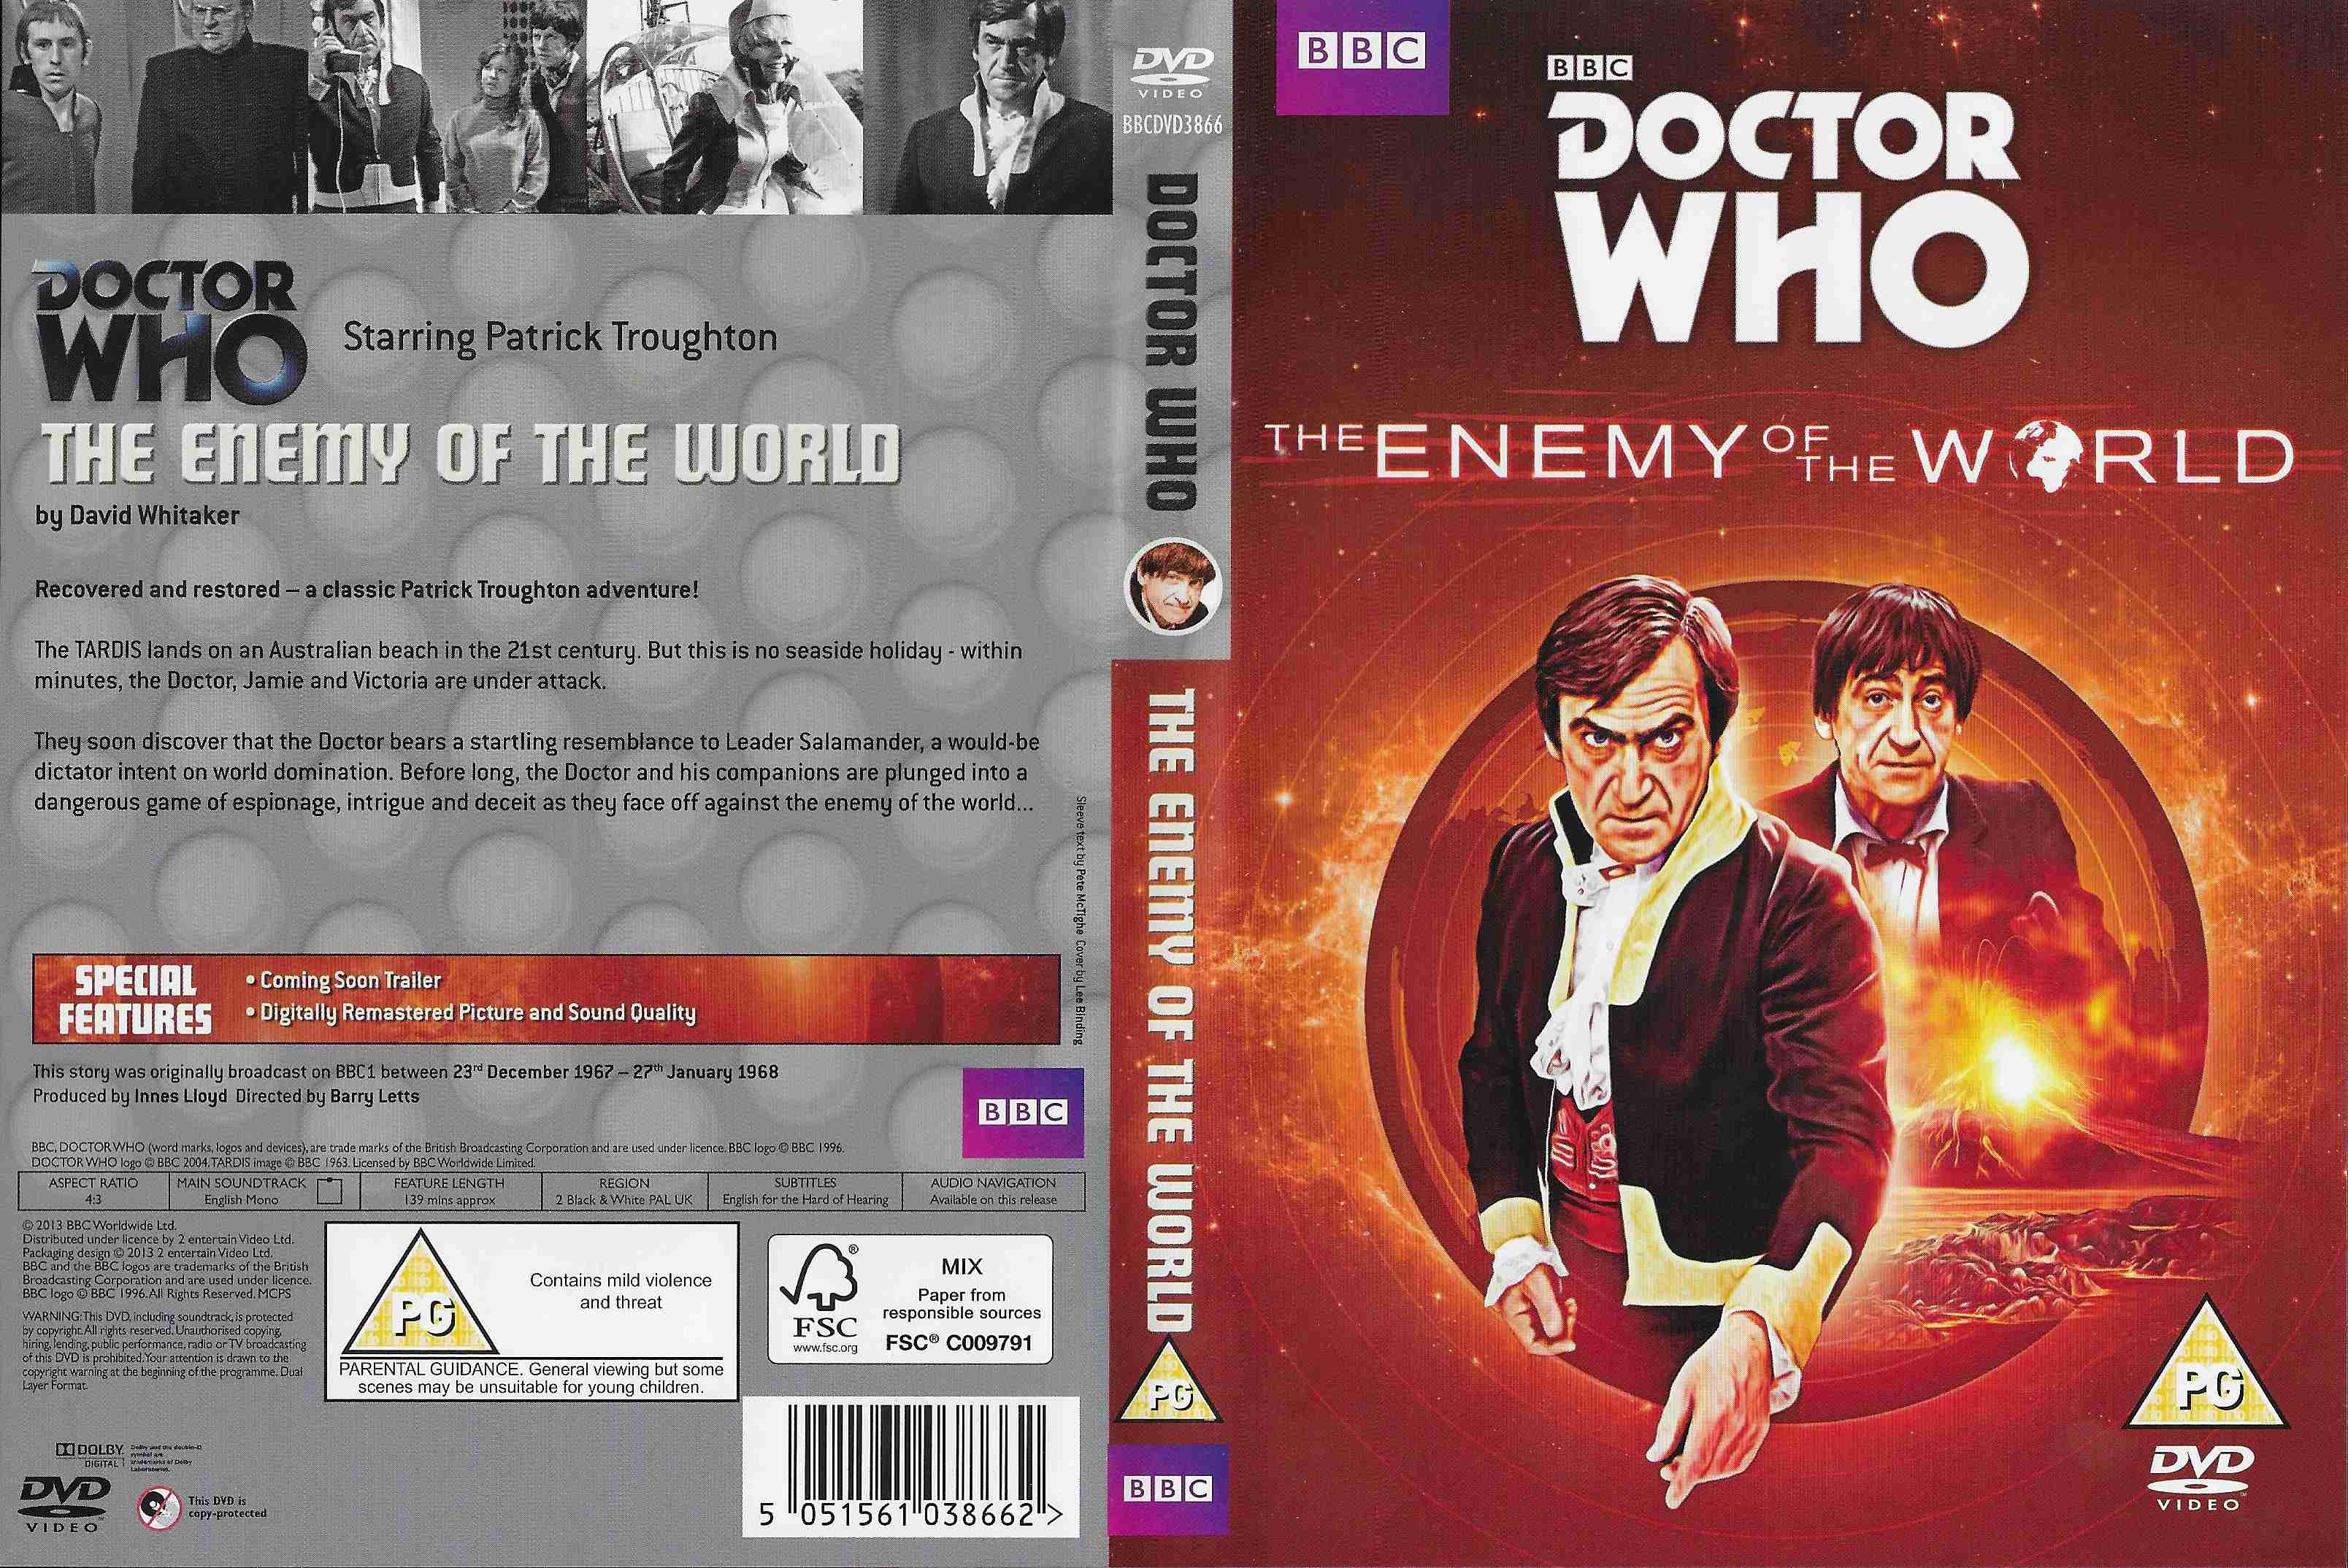 Picture of BBCDVD 3866 Doctor Who - The enemy of the world by artist David Whitaker from the BBC records and Tapes library